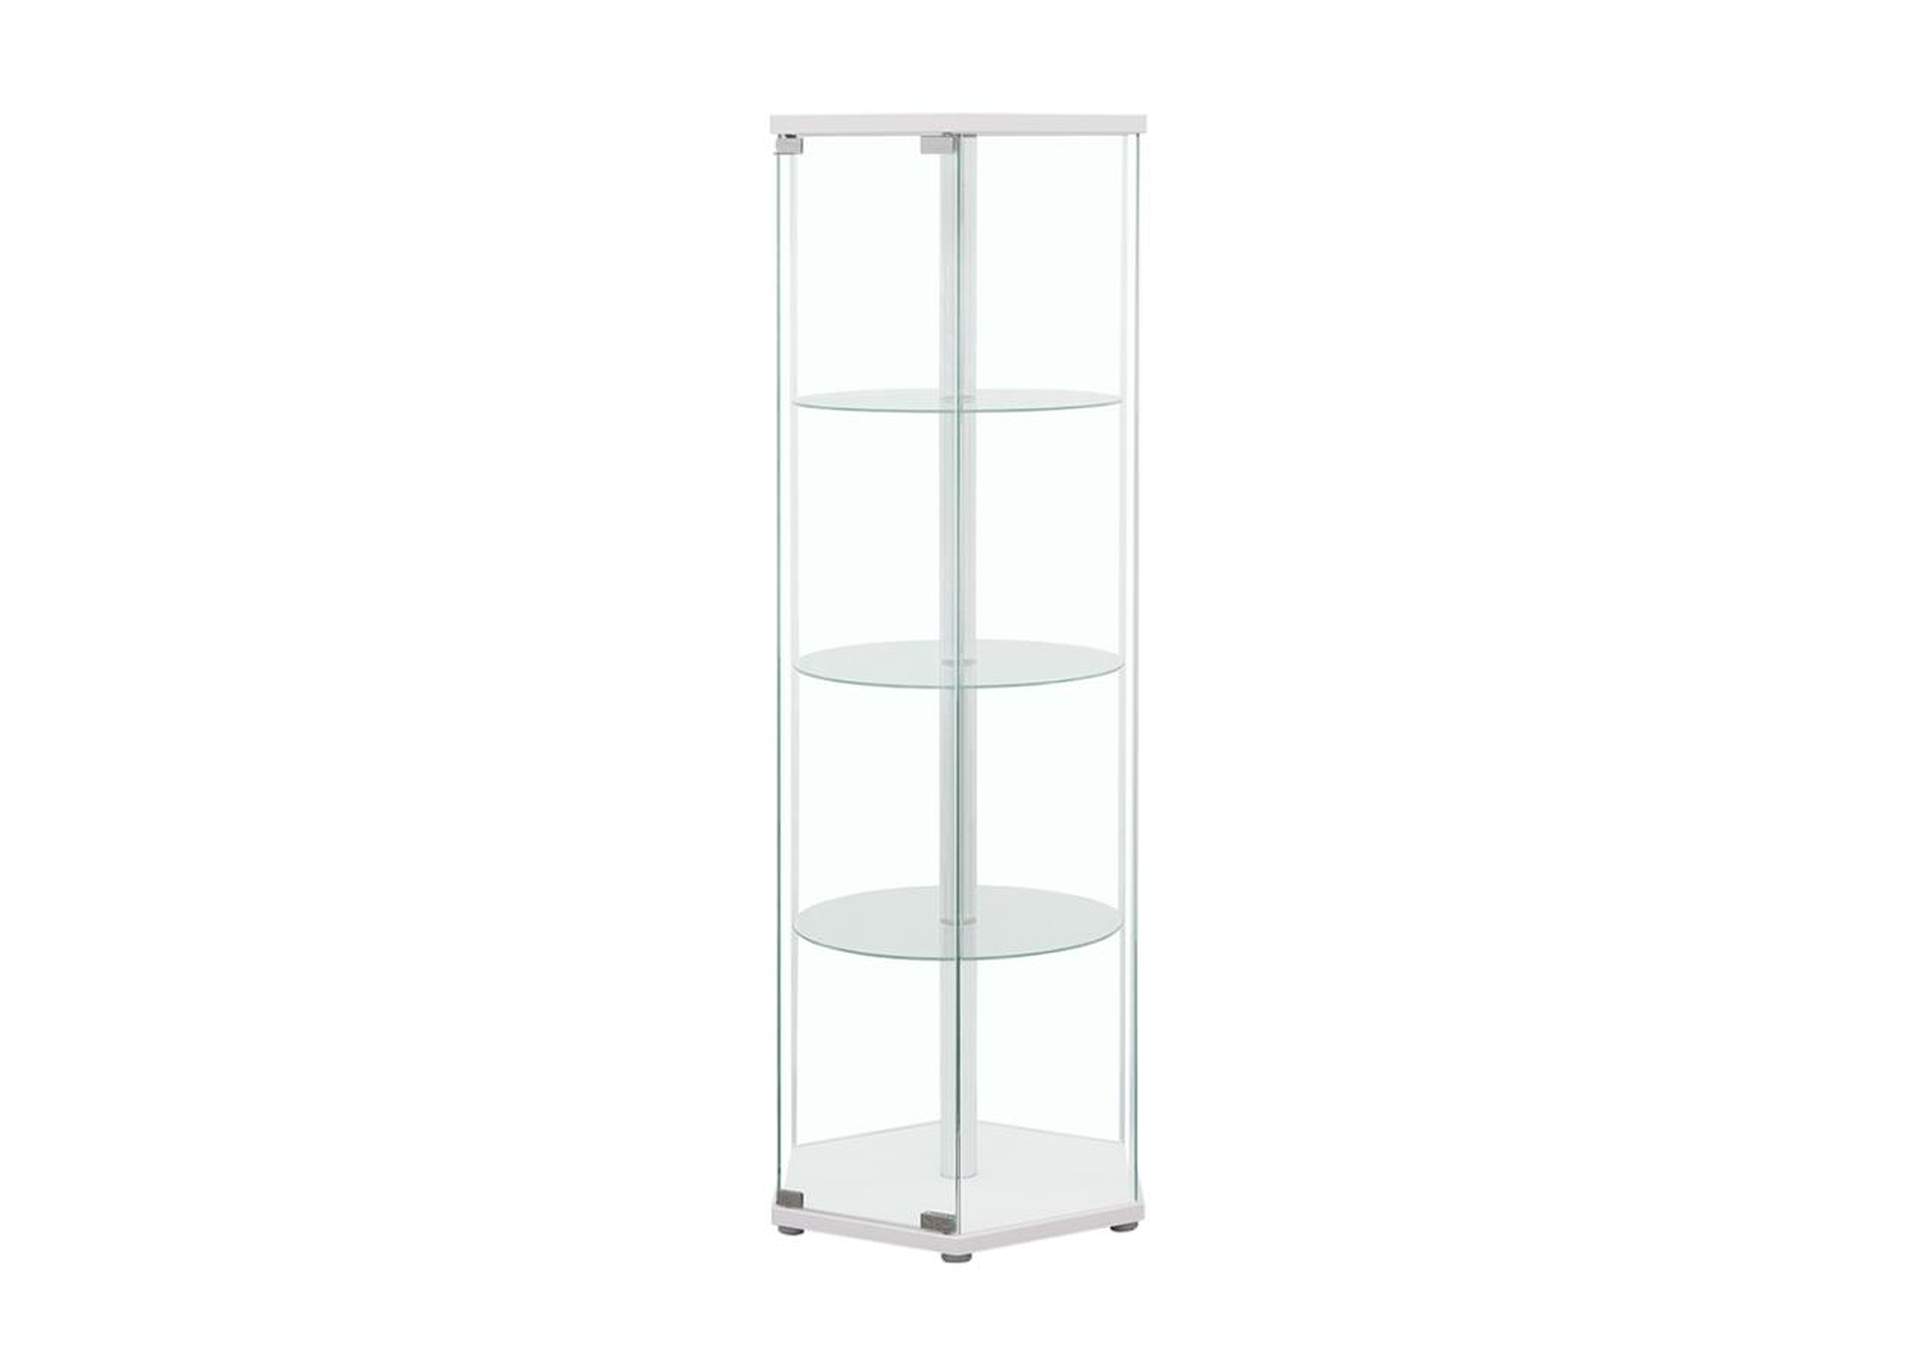 4-shelf Hexagon Shaped Curio Cabinet White and Clear,Coaster Furniture